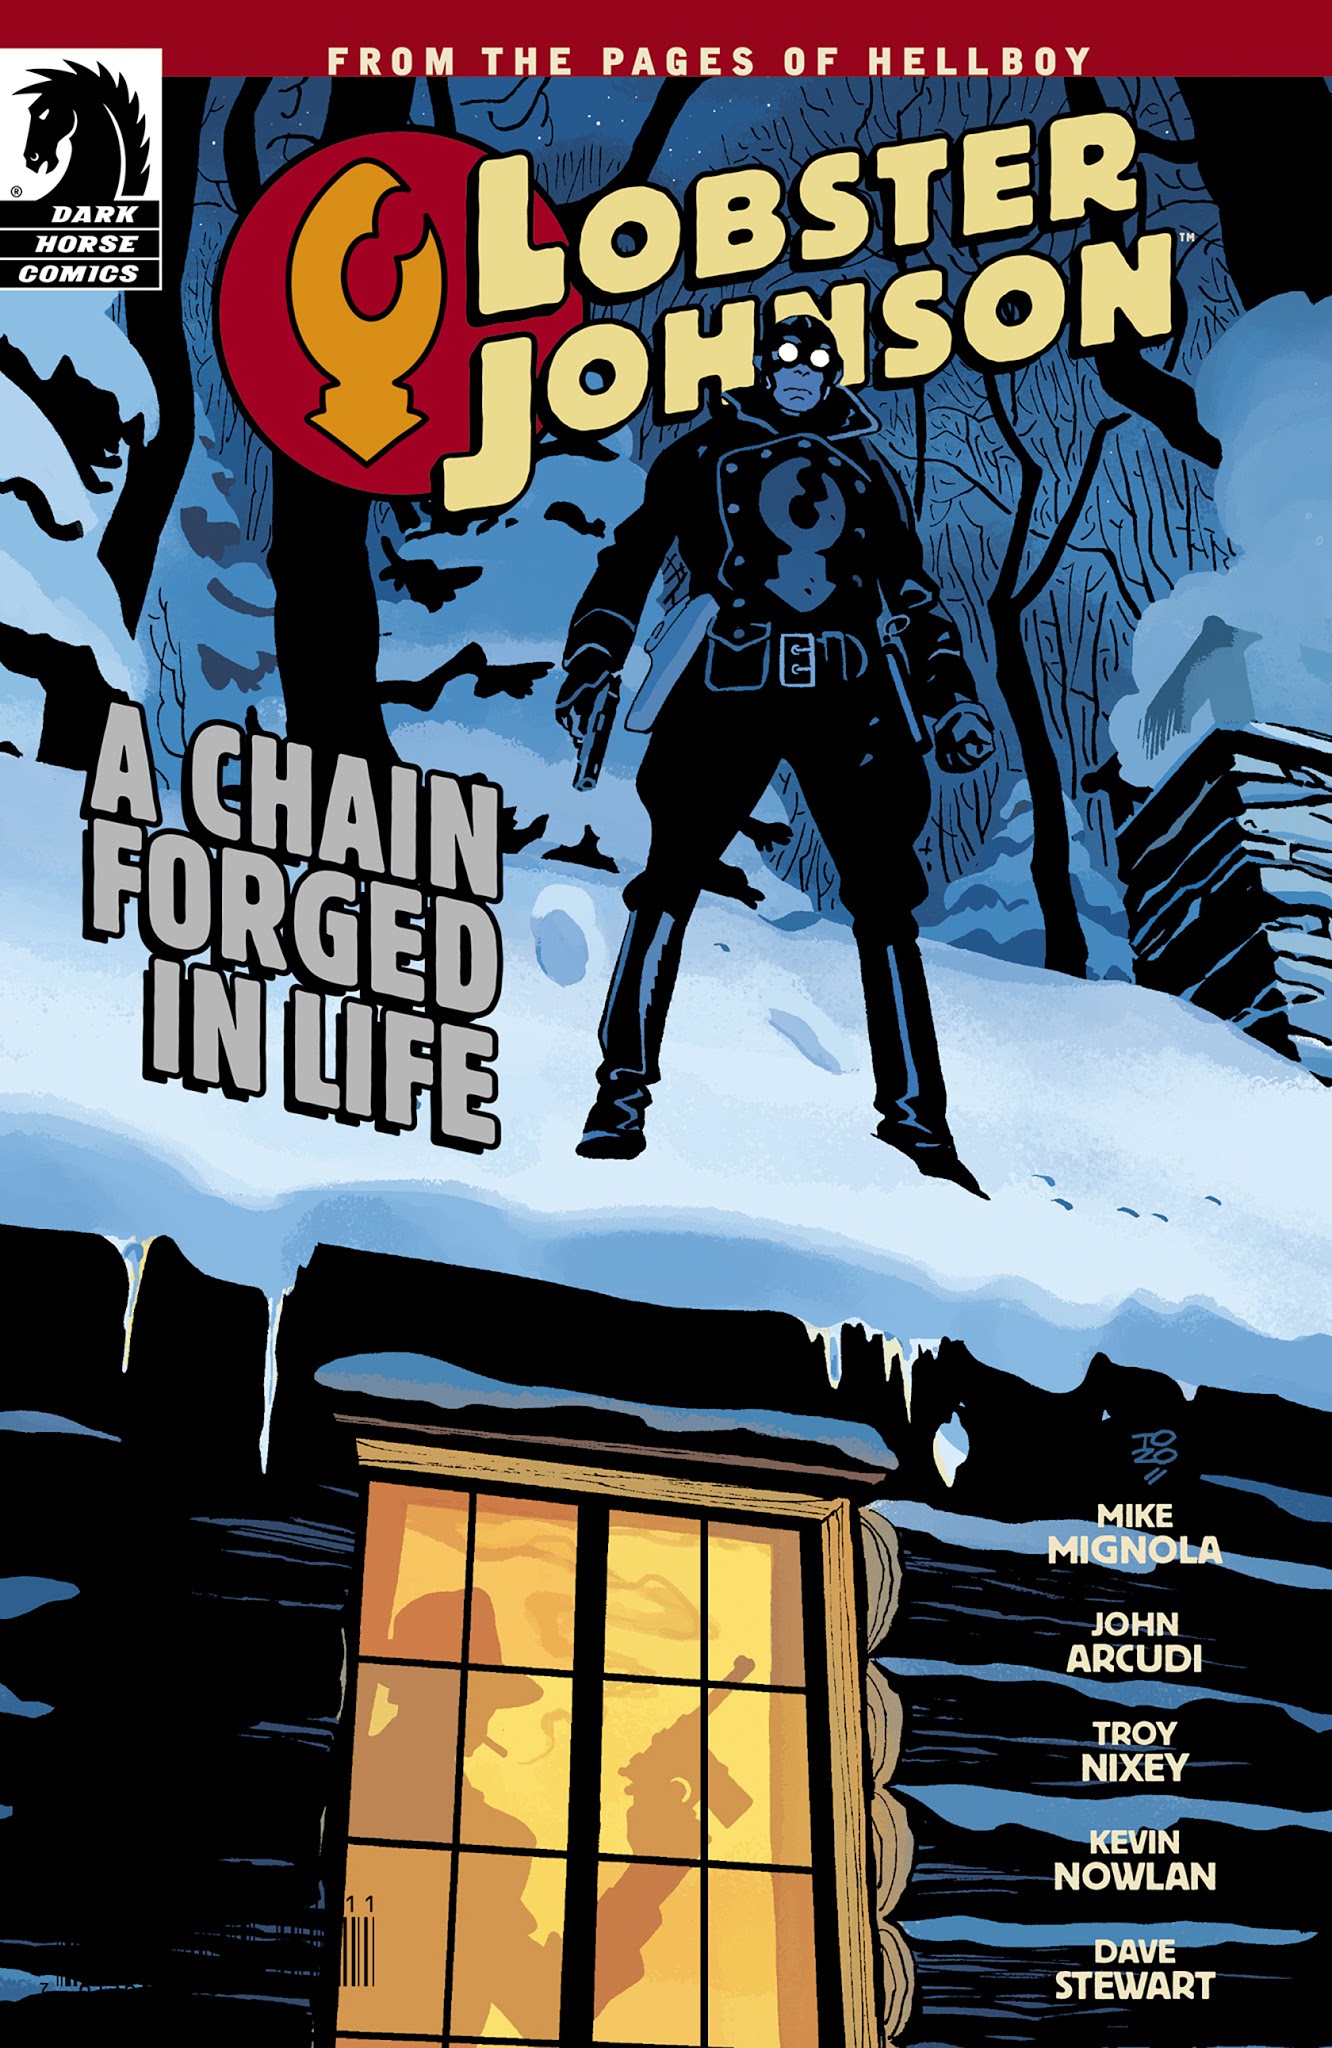 Read online Lobster Johnson: A Chain Forged in Life comic -  Issue # Full - 1